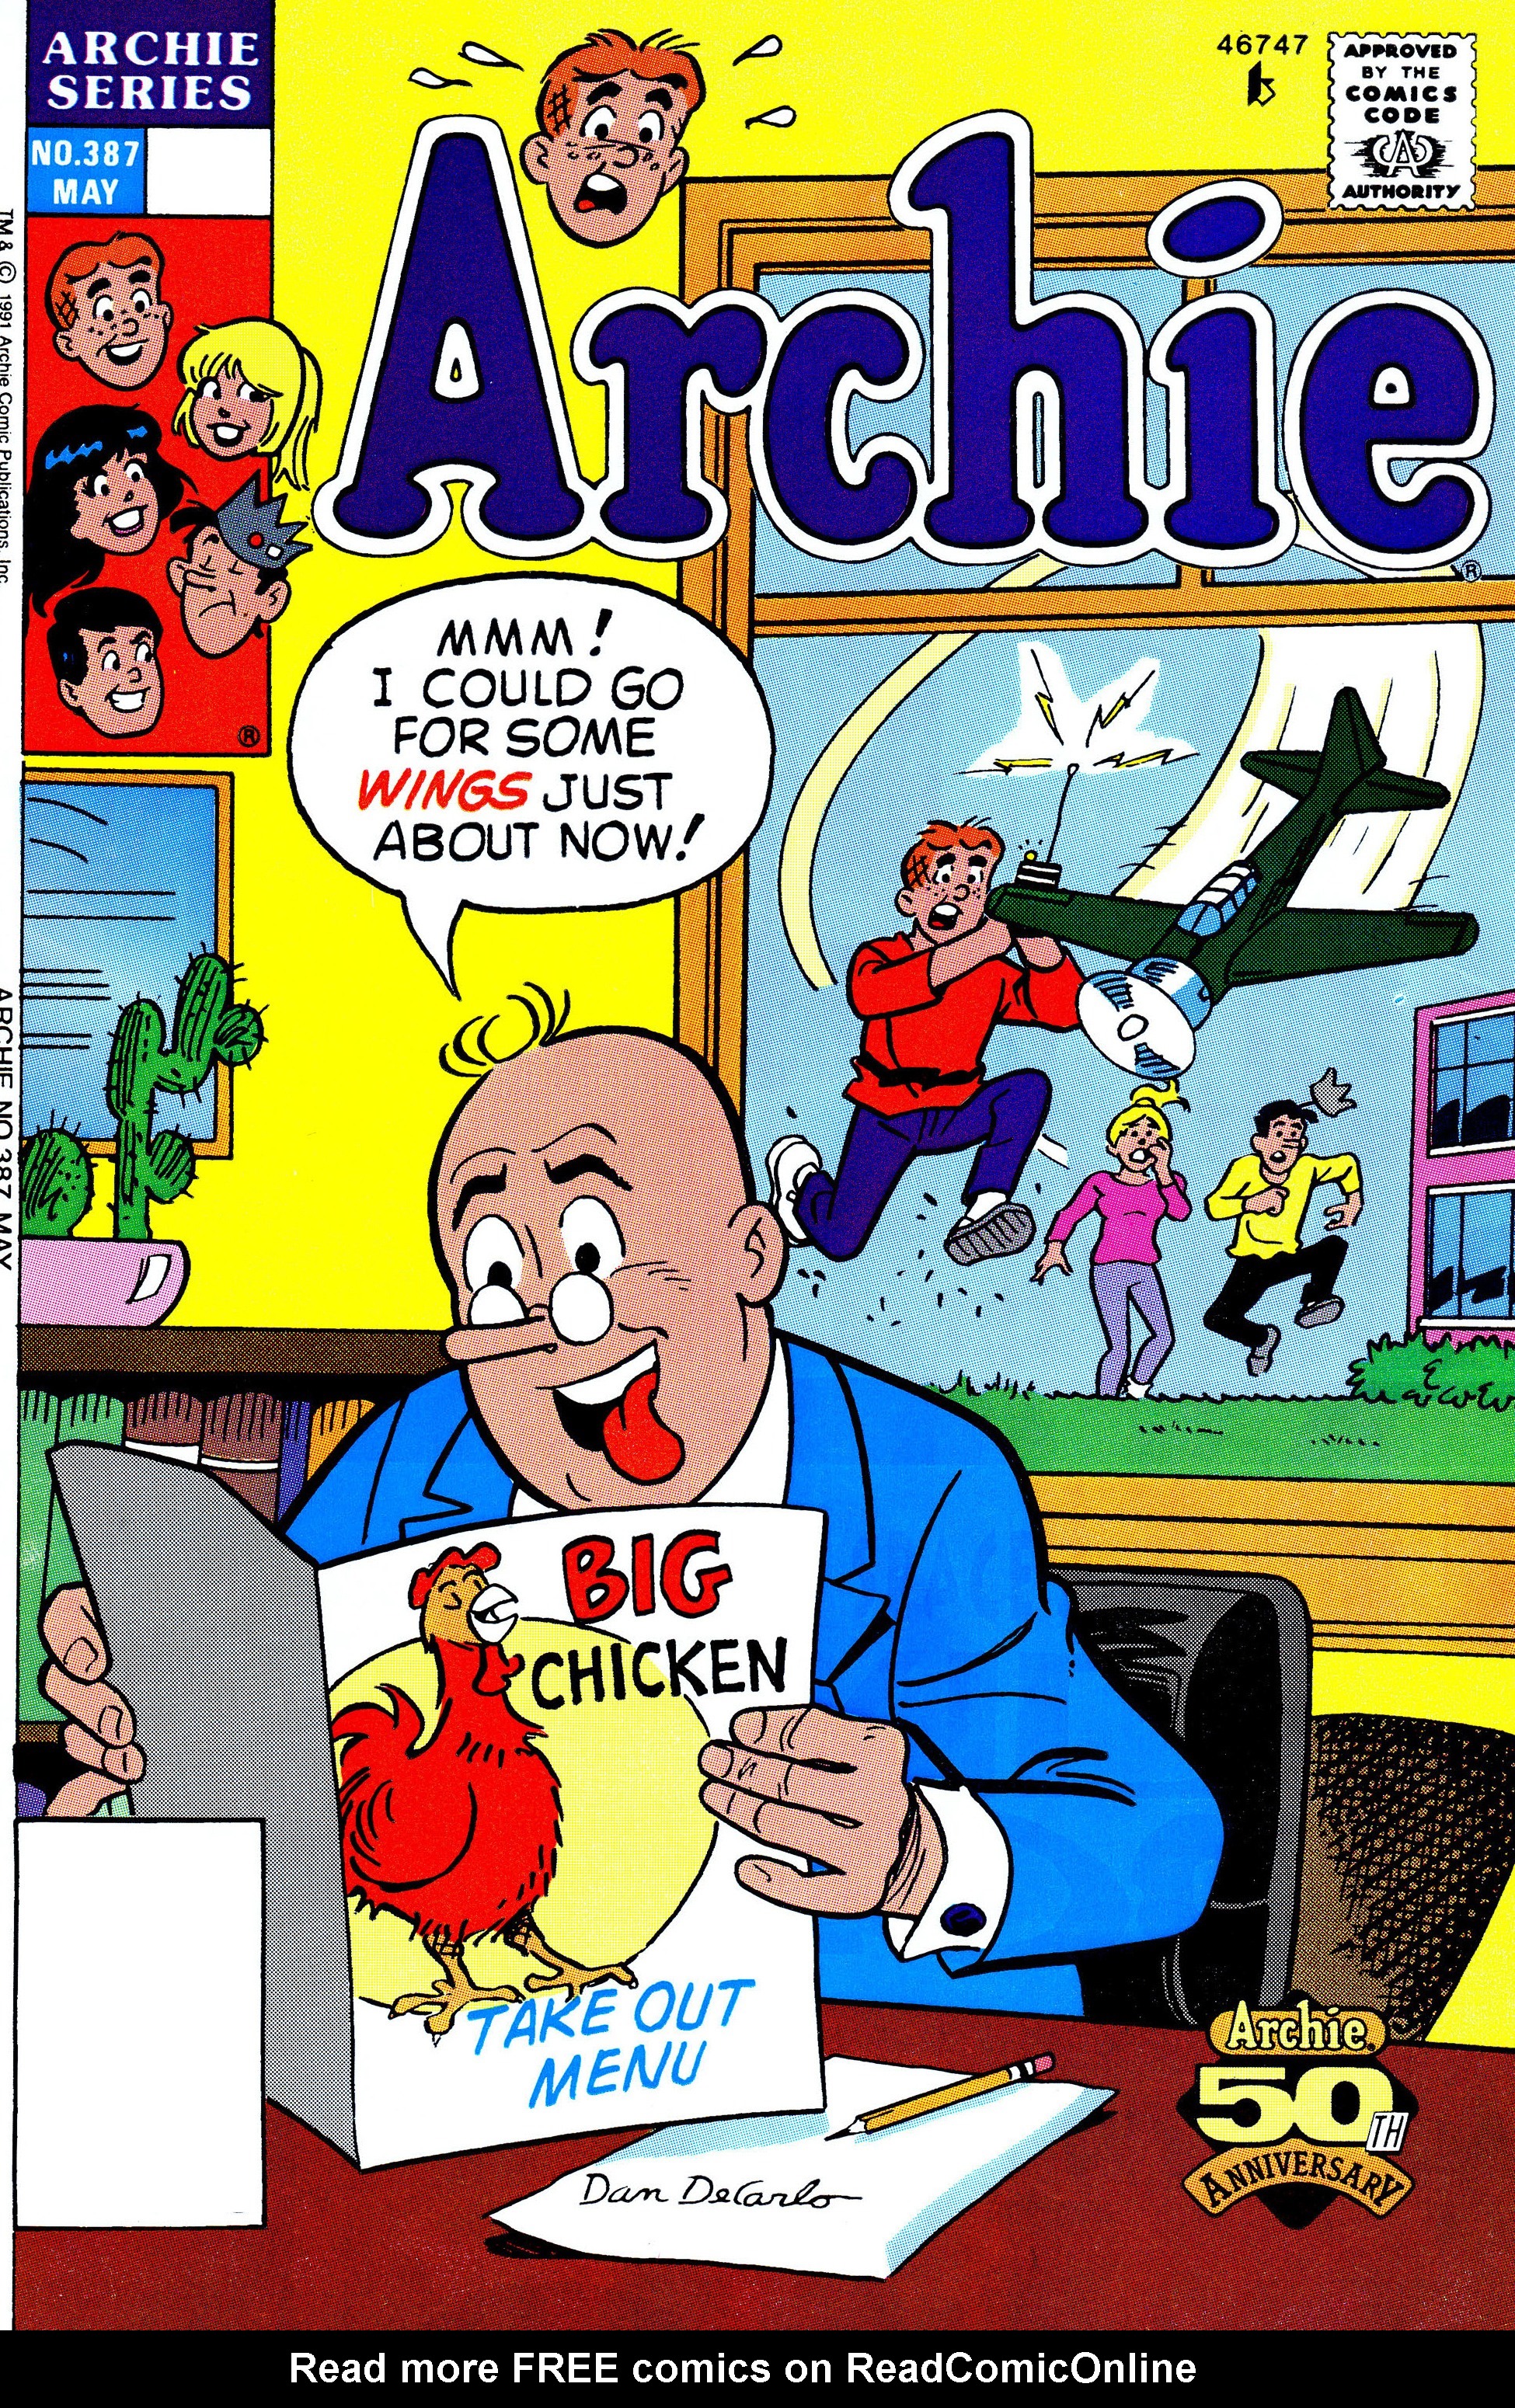 Read online Archie (1960) comic -  Issue #387 - 1